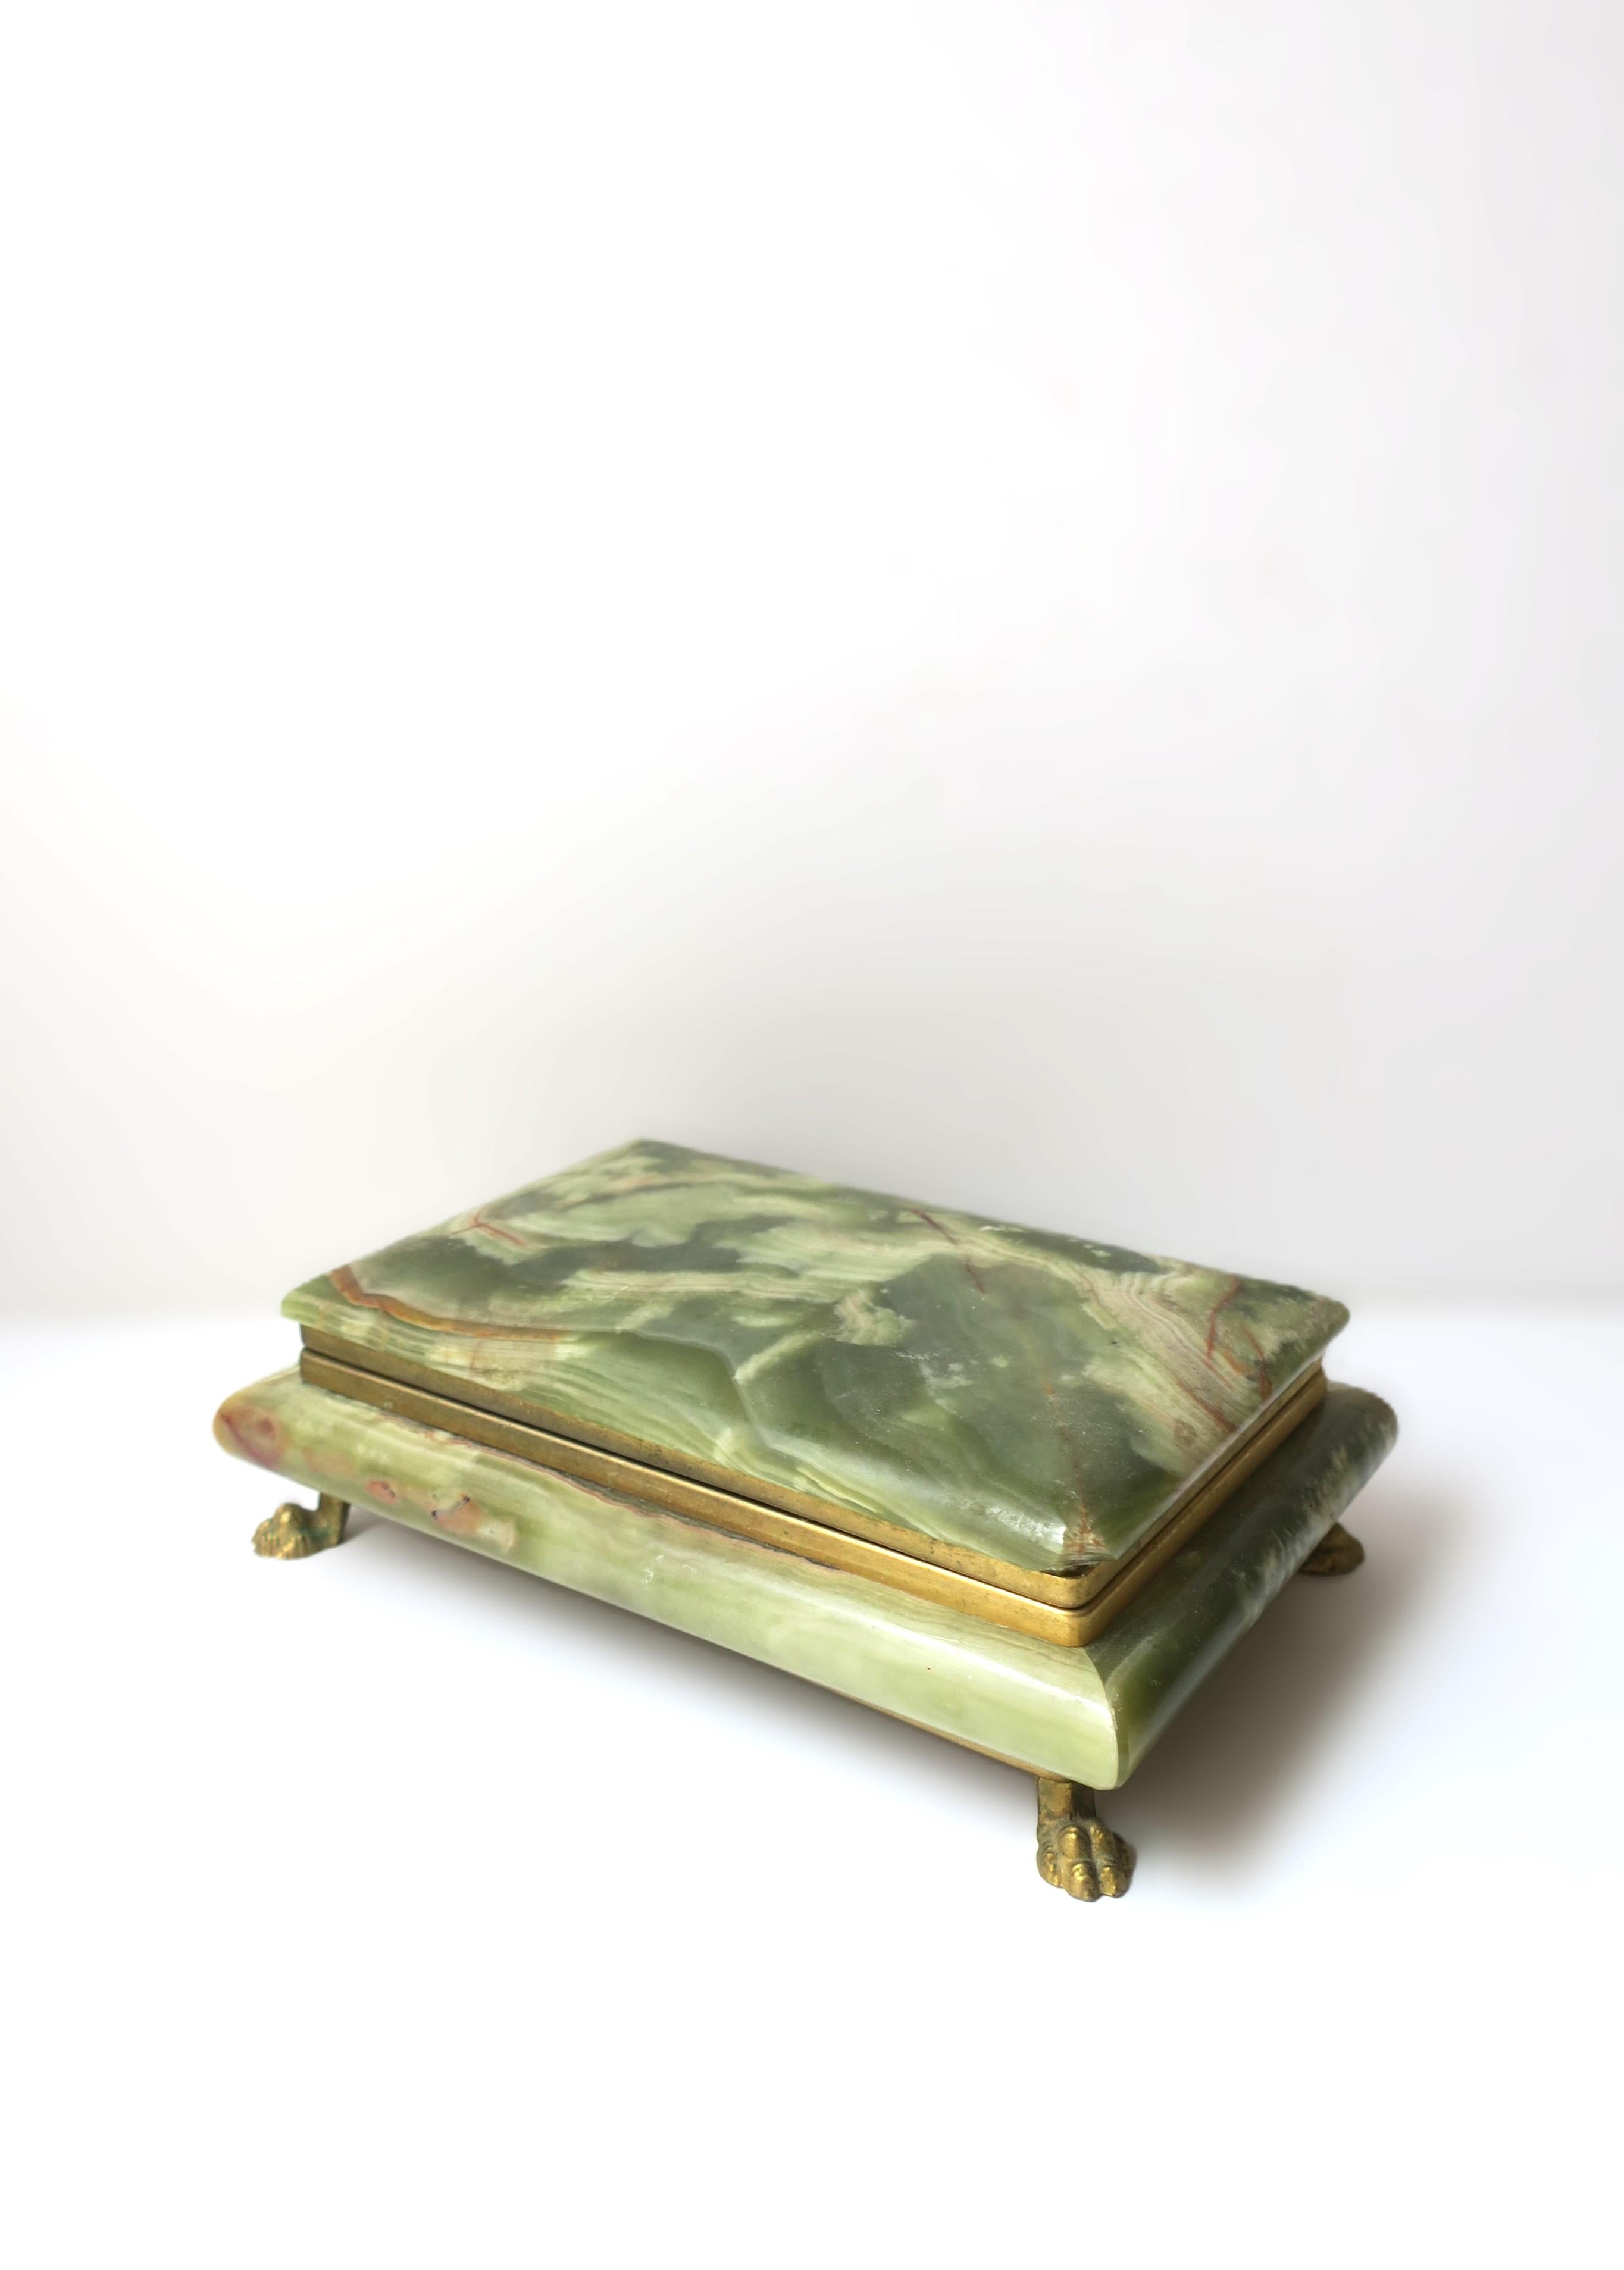 A substantial Italian green onyx marble and gold gilt metal jewelry or decorative box, in the Empire style, circa mid-20th century, Italy. Onyx is a combination of green hues finished a gold gilt metal hinge and lion paw feet base. Beautiful as a